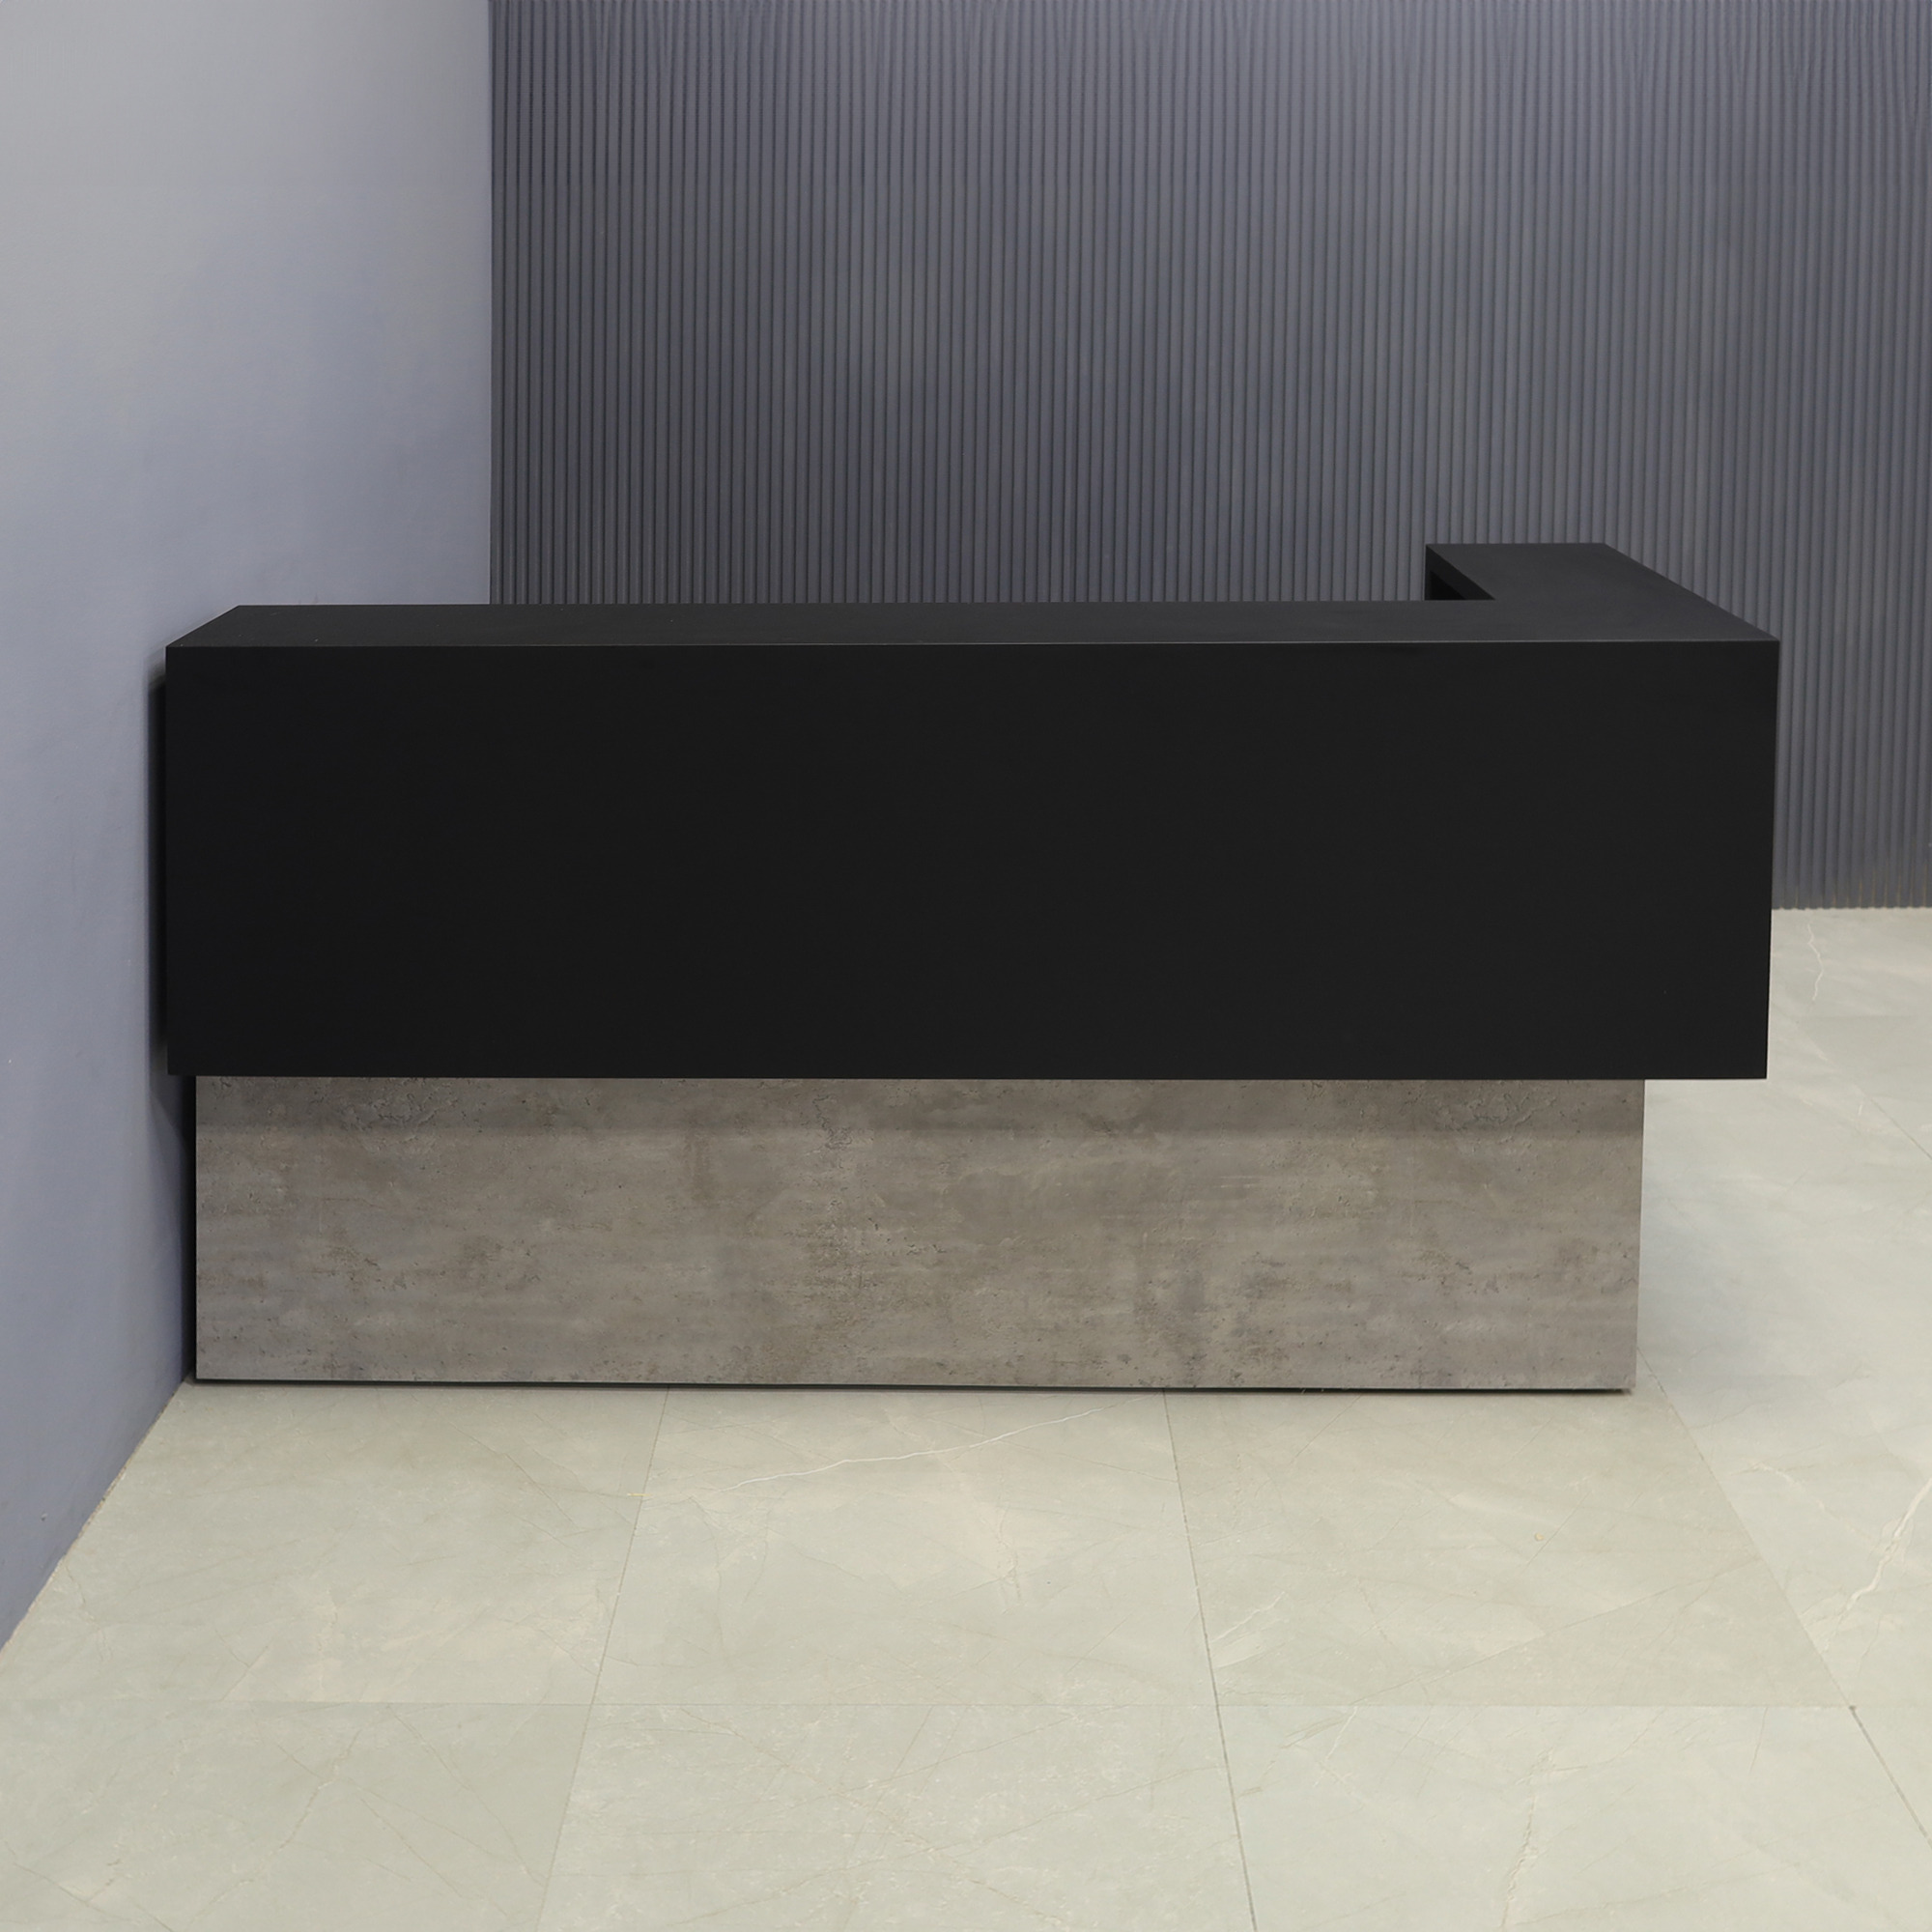 72-inch San Francisco L-Shape Reception Desk, right l-panel side when facing front in black traceless laminate counter and indusrial concrete laminate desk, shown here.